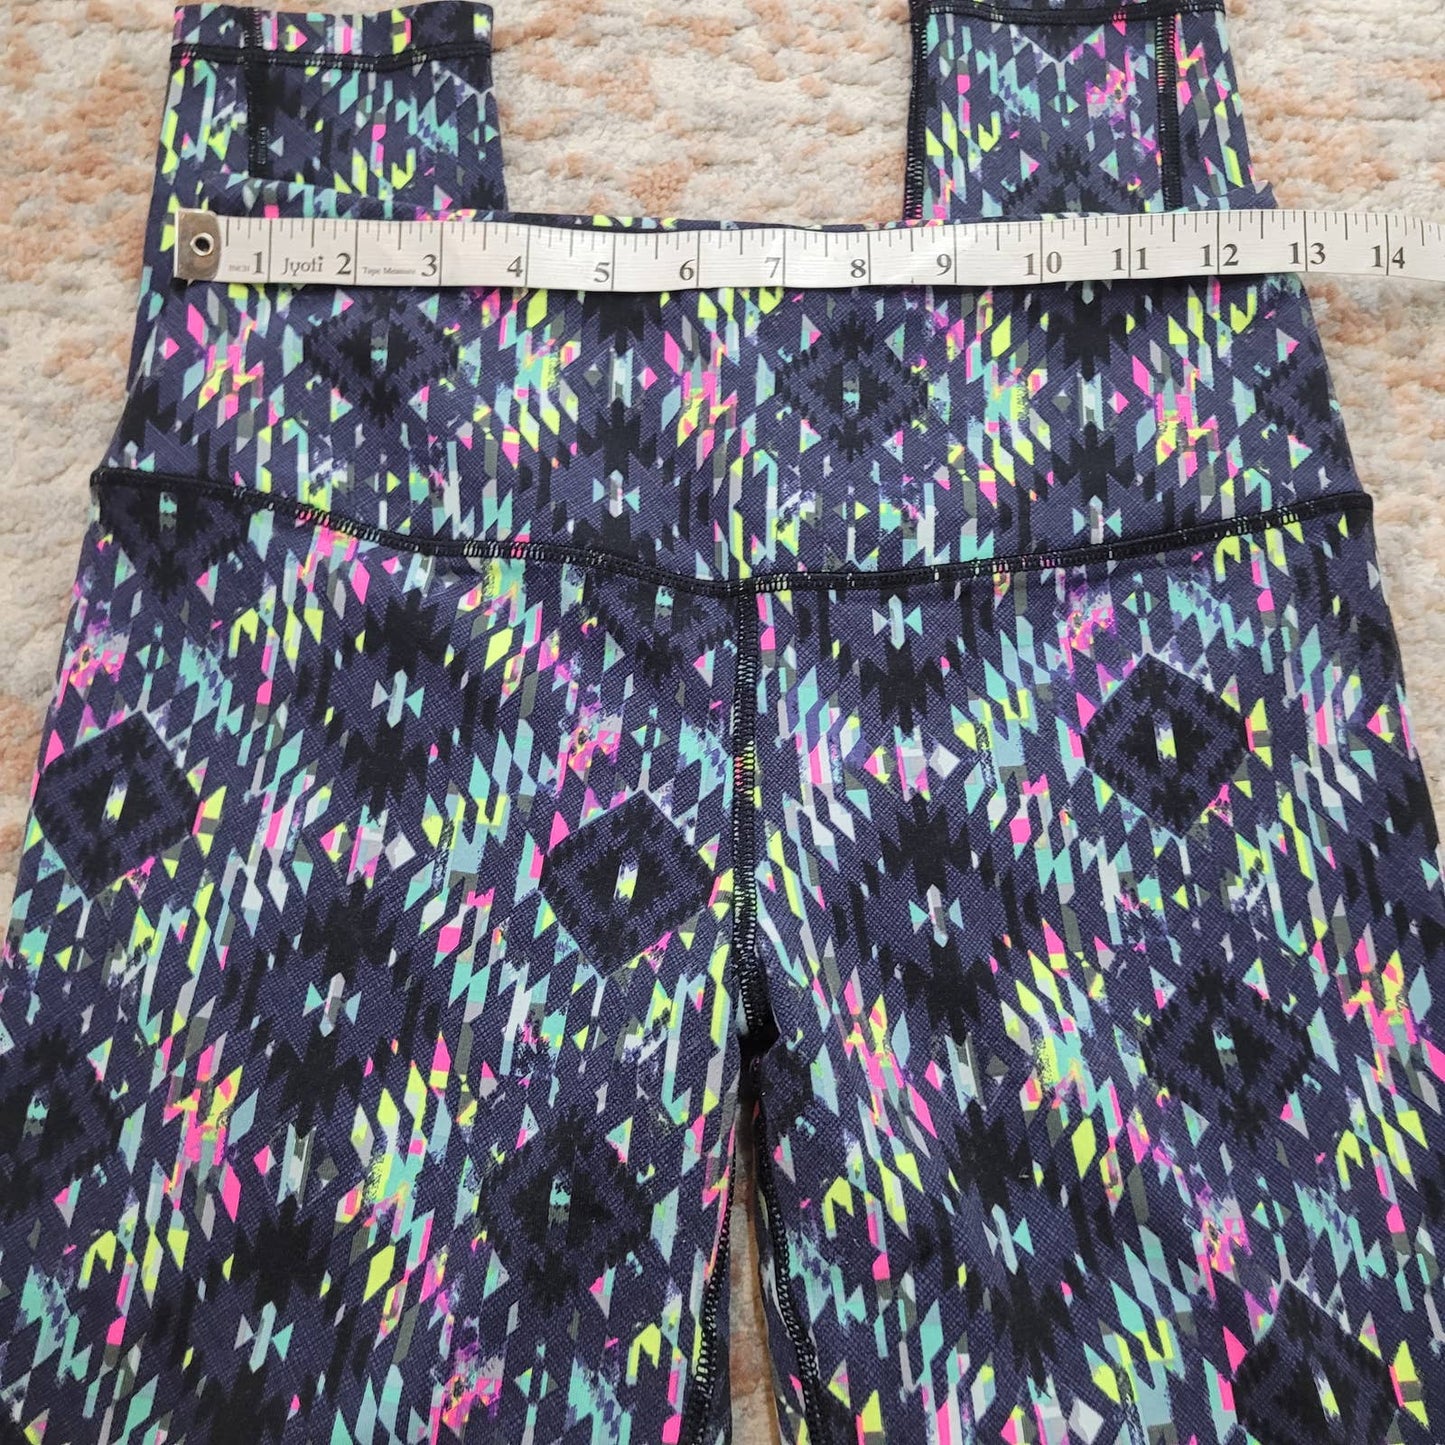 Knockout by Victoria’s Secret Sport Leggings VSX Ikat Abstract - Size Small